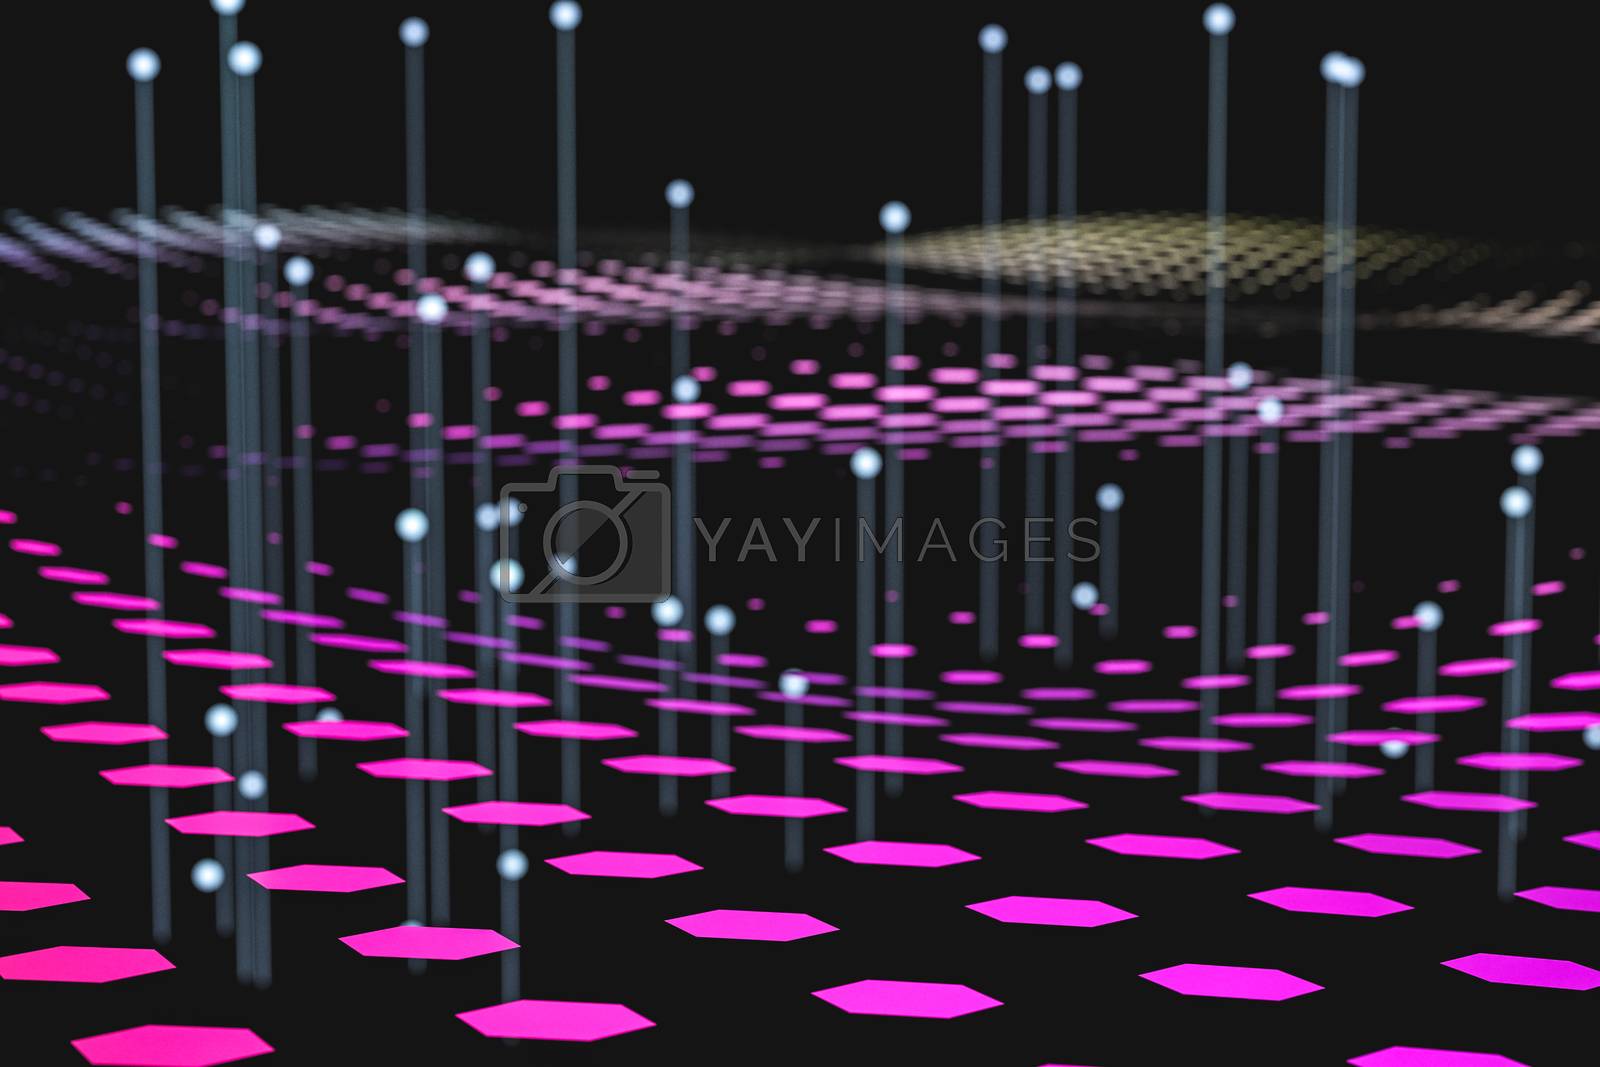 Royalty free image of 3d rendering, flow dot with gradient background by vinkfan